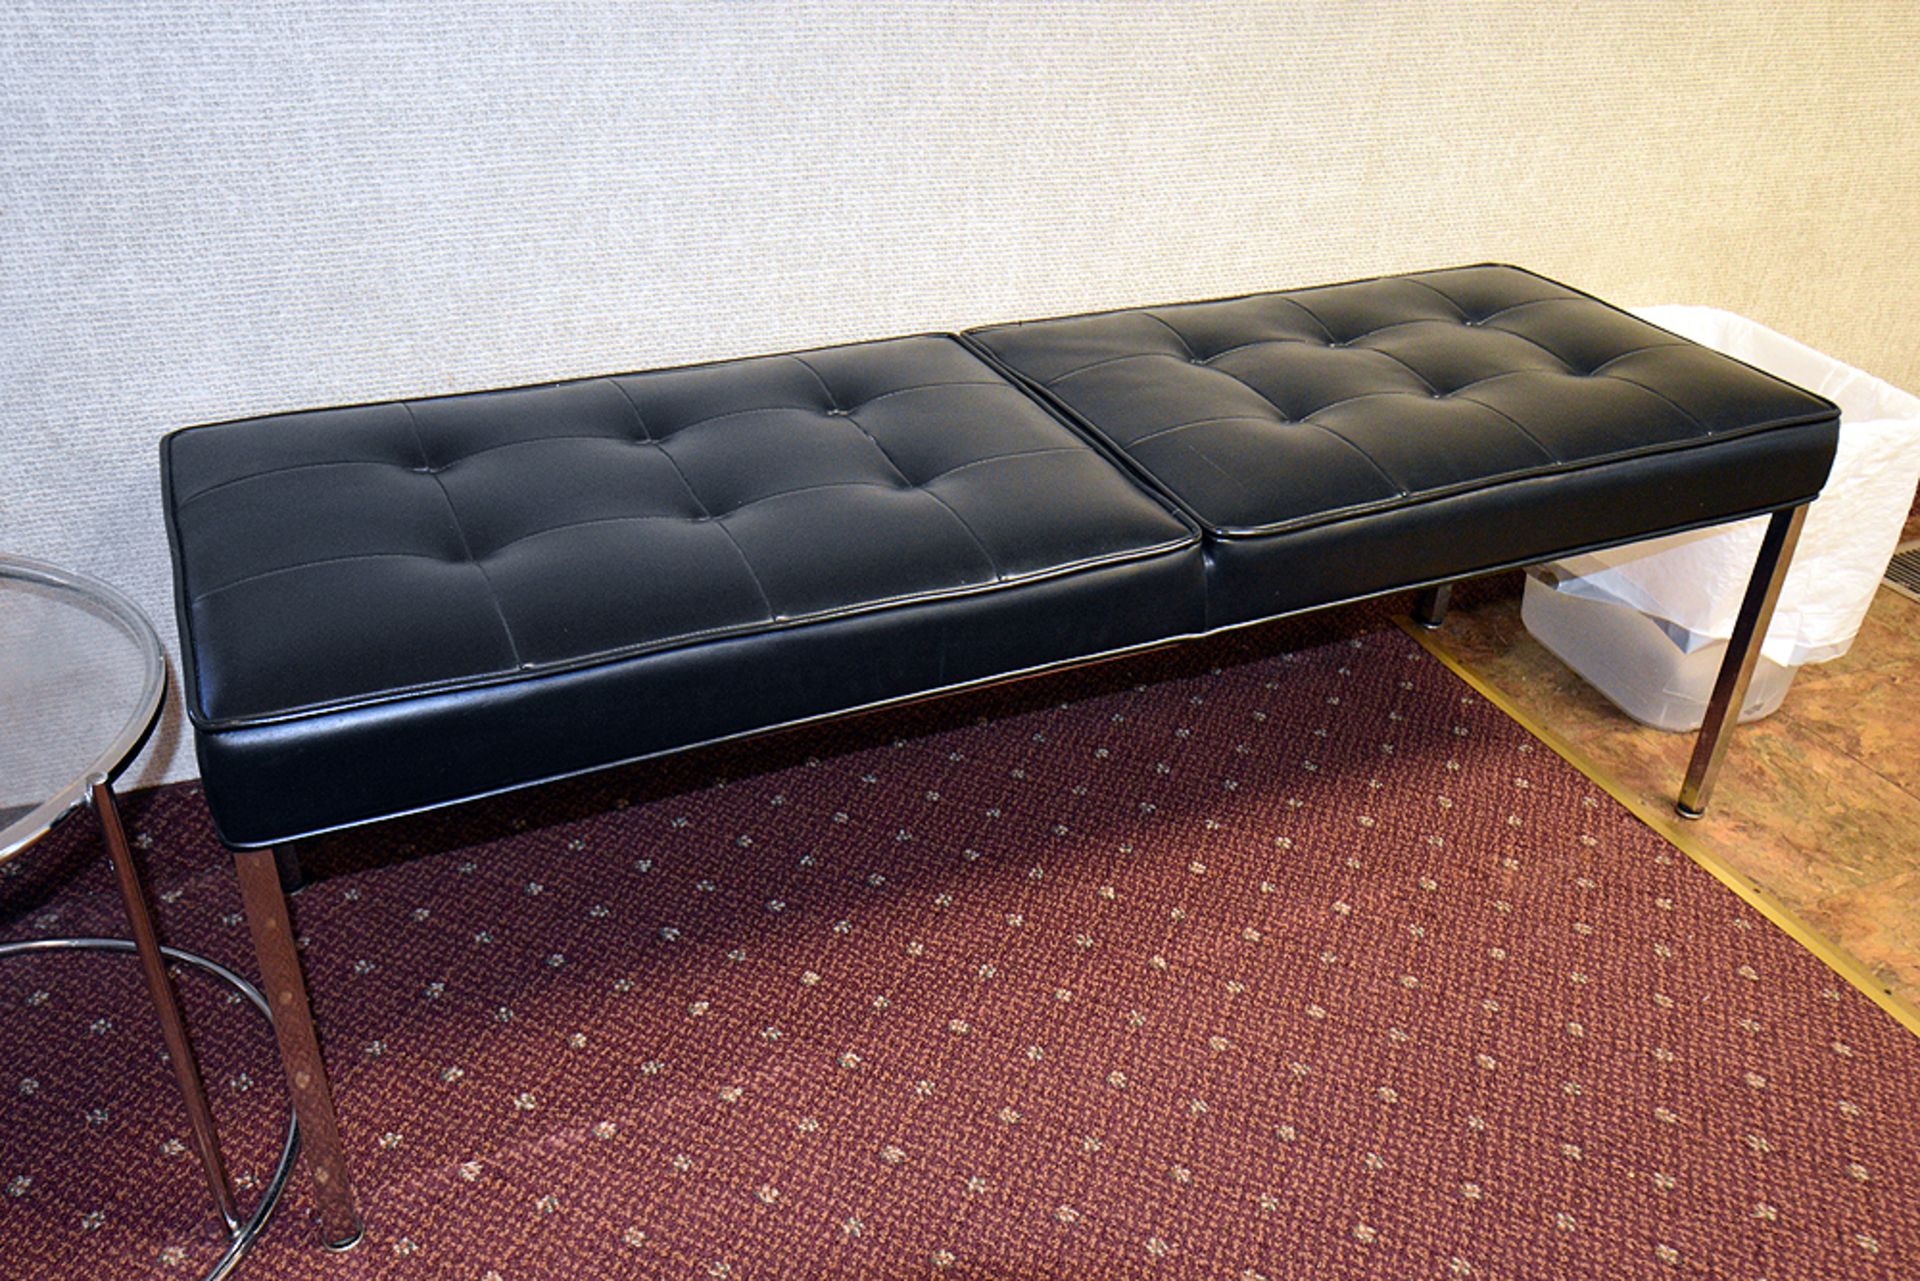 {Lot} A Group of Ass't Furniture Throughout Reception Area - Image 9 of 9